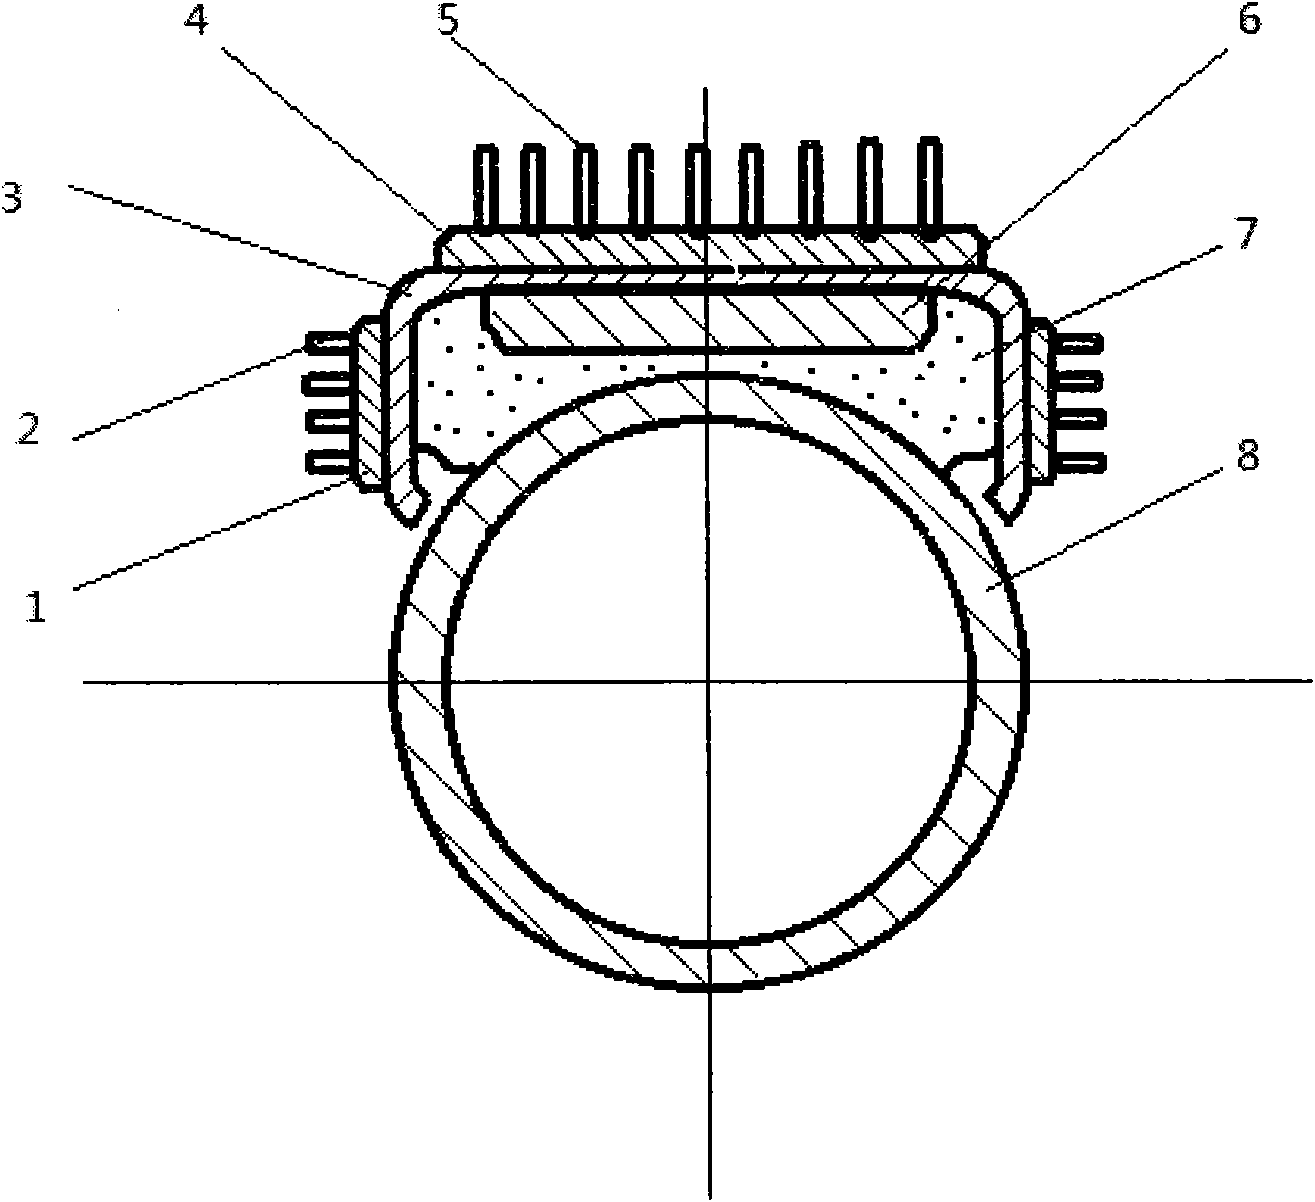 Non-intrusive flow measuring device for industrial gas pipeline